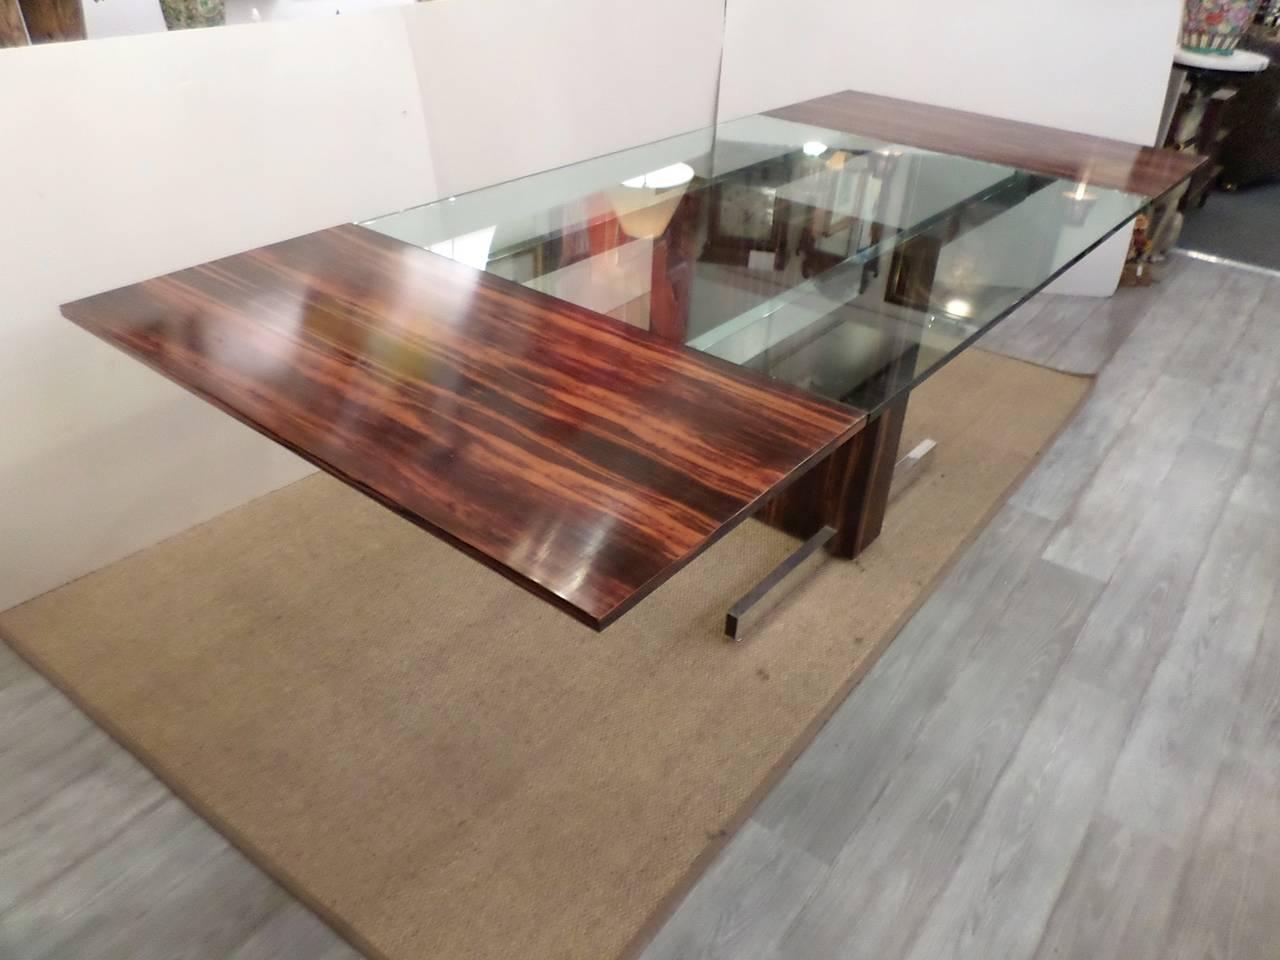 Stunning Mid-Century Modern dining table or conference table with rosewood veneer leaves at either end, polished aluminum, brass and a sleek design where the two leaves can lift off to become a glass top table. 
Fully extended: 29 1/2" x